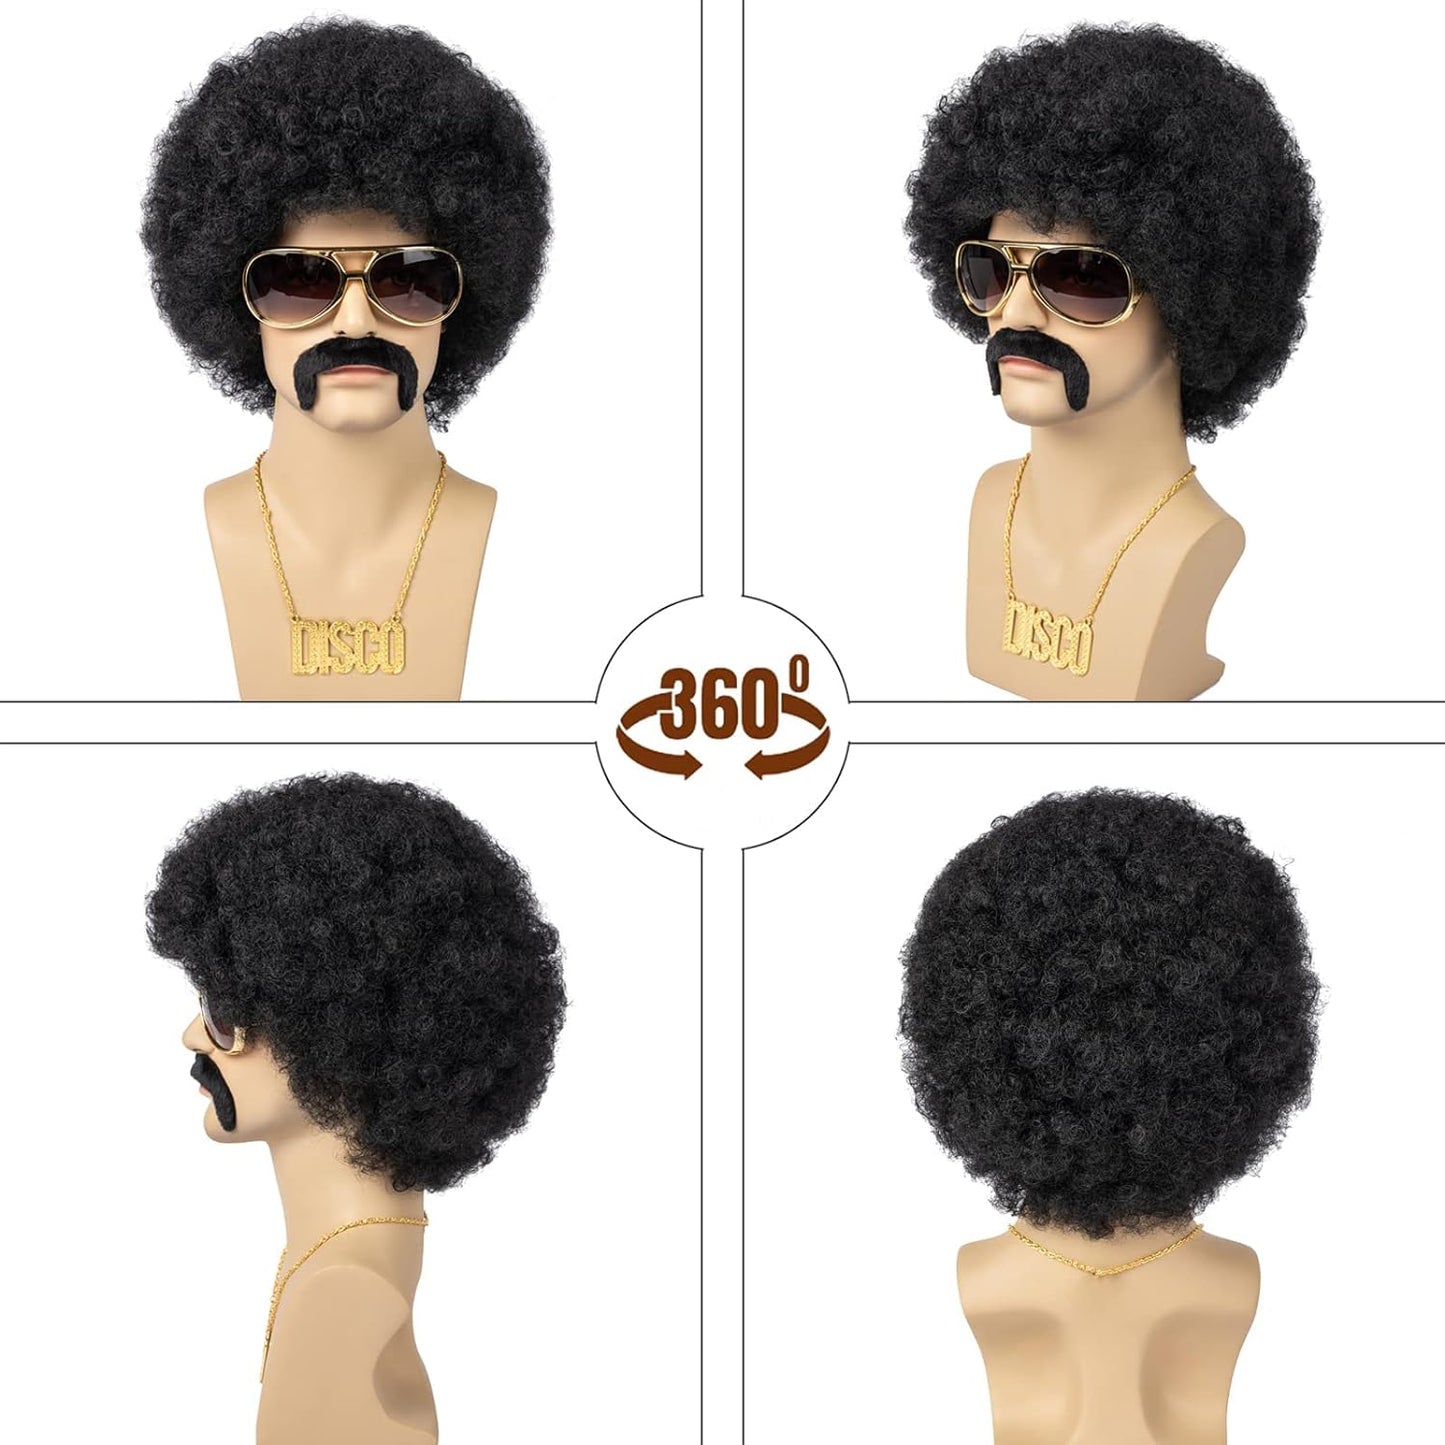 Excefore Wig Men, 4pcs Set 70'S Costumes Wig Disco Wig for Men Natural Fluffy Short Black Curly Synthetic hair Wig for Halloween Cosplay Party (Wig+ Glasses+ Necklace+ Mustache)